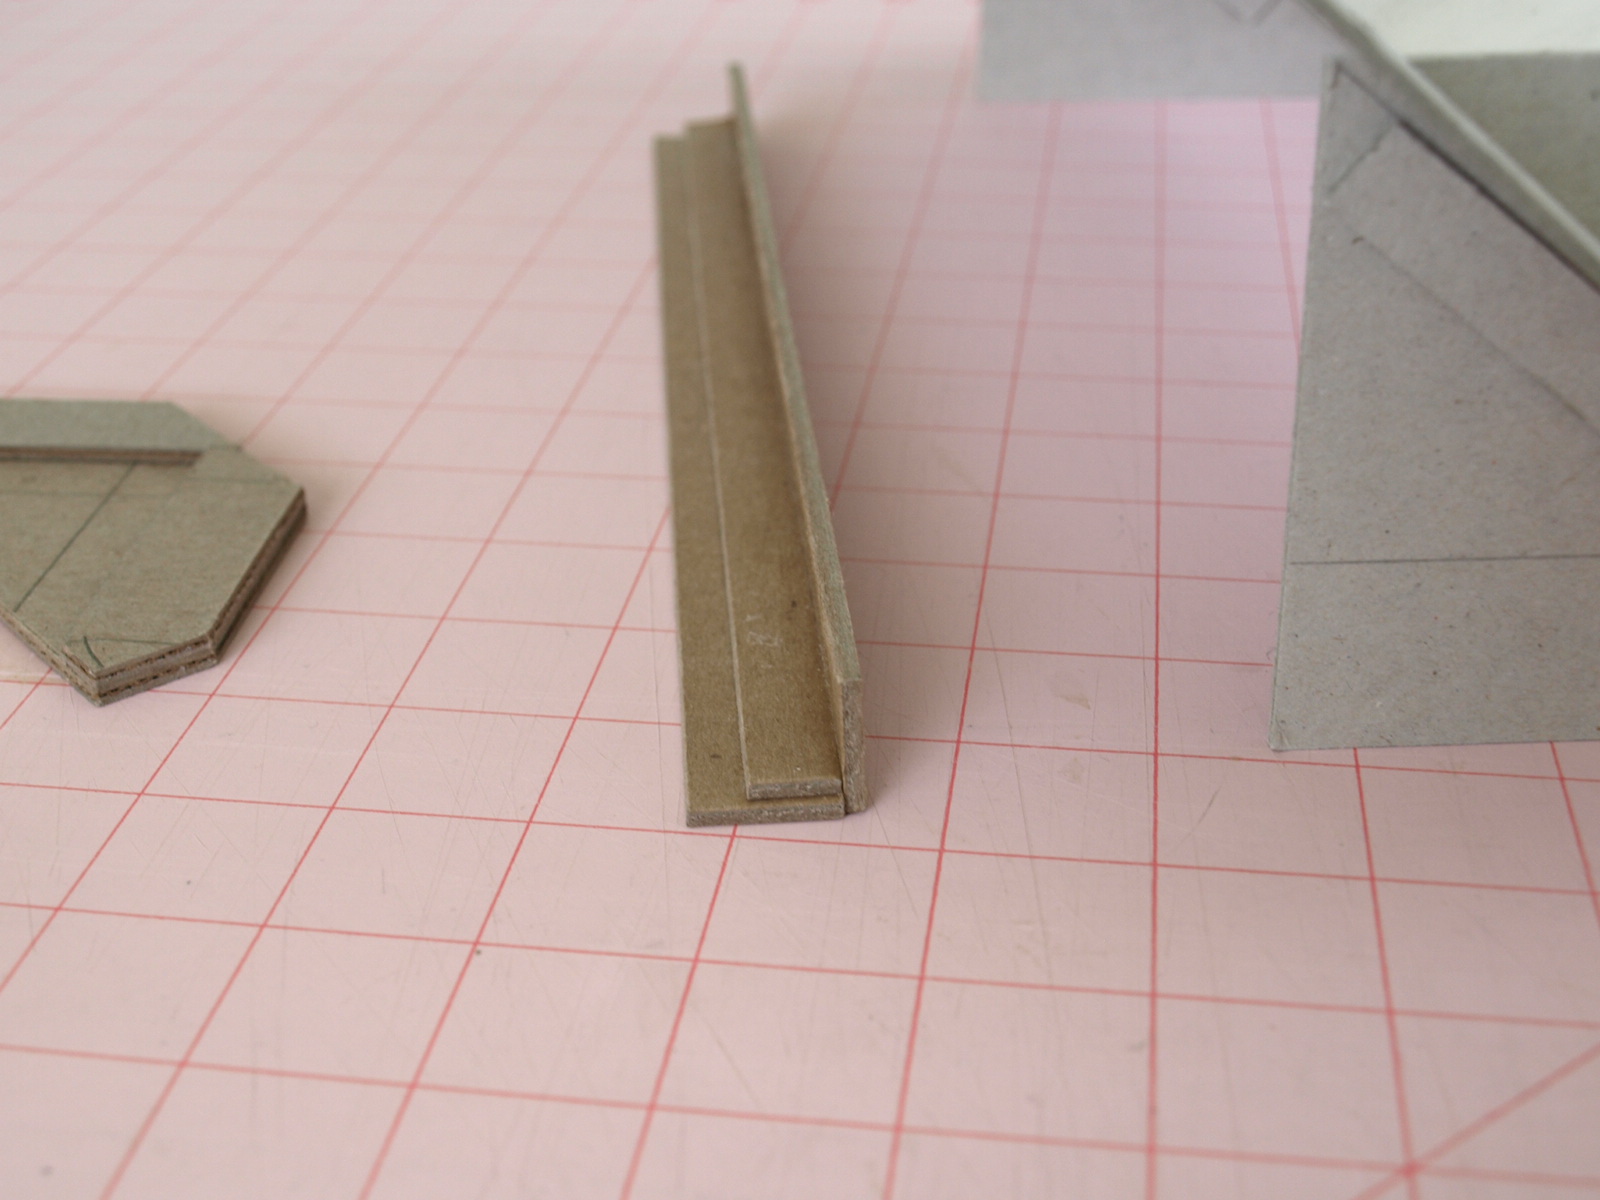 The Design Loft: Bookbinding tools from book board